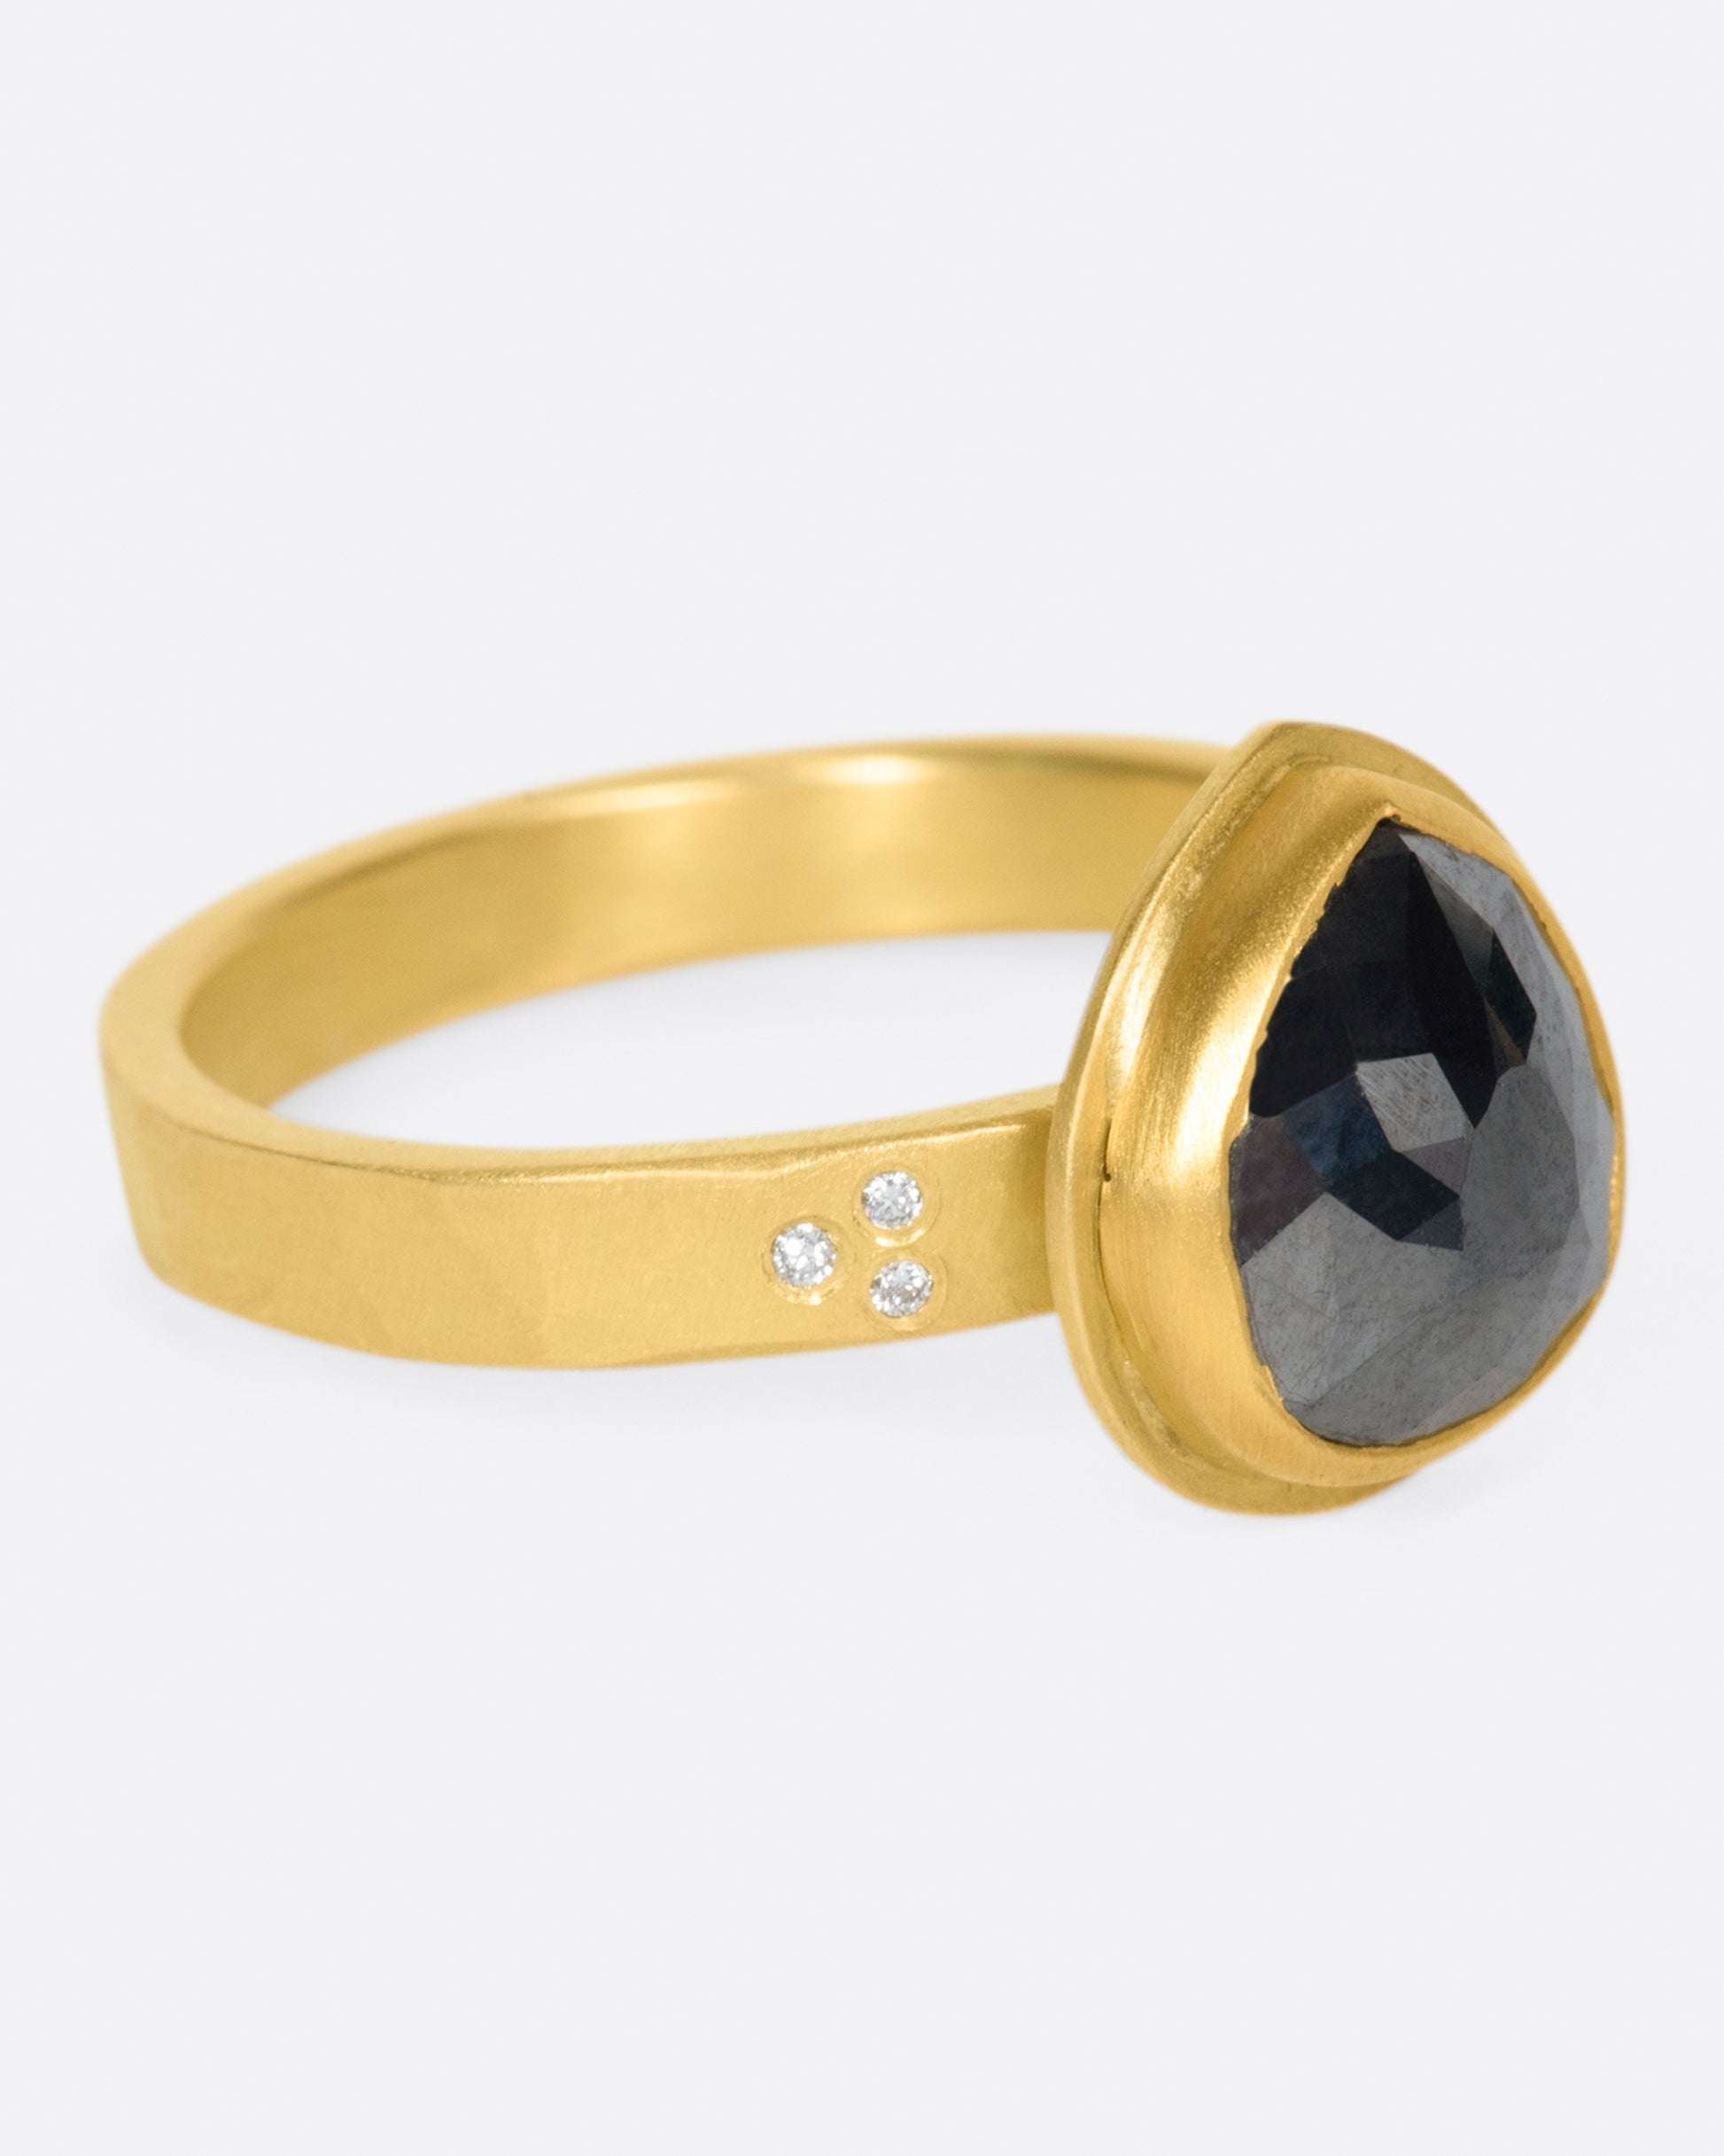 A faceted, pear shaped black diamond in a 22k gold setting with white diamond accents.